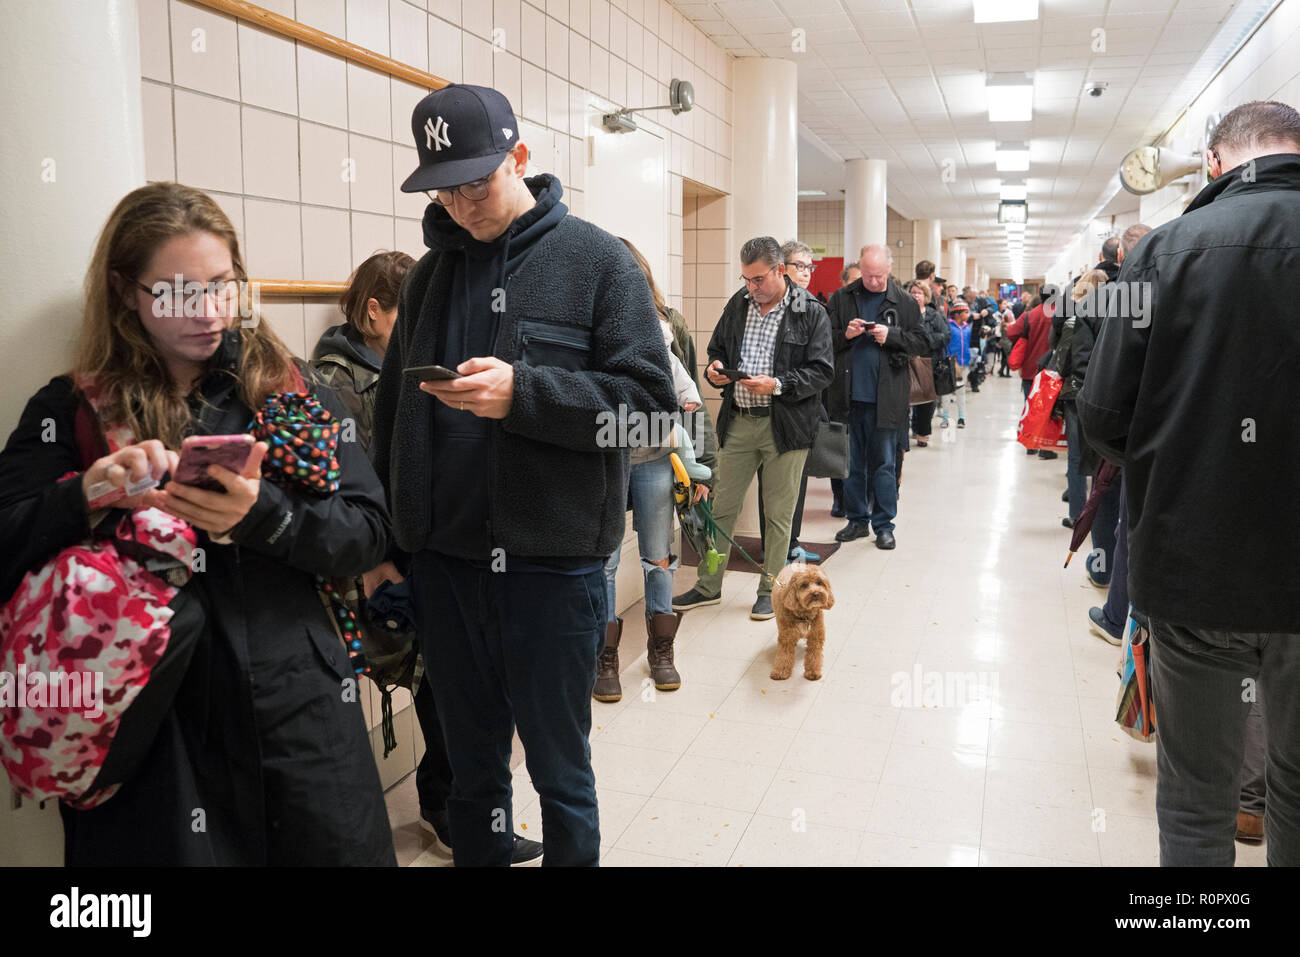 New York, NY, 6th Nov., 2018 — People waited in line to vote at a public school in Tribeca on Nov. 6, 2018. Credit: Terese Loeb Kreuzer/Alamy News Stock Photo